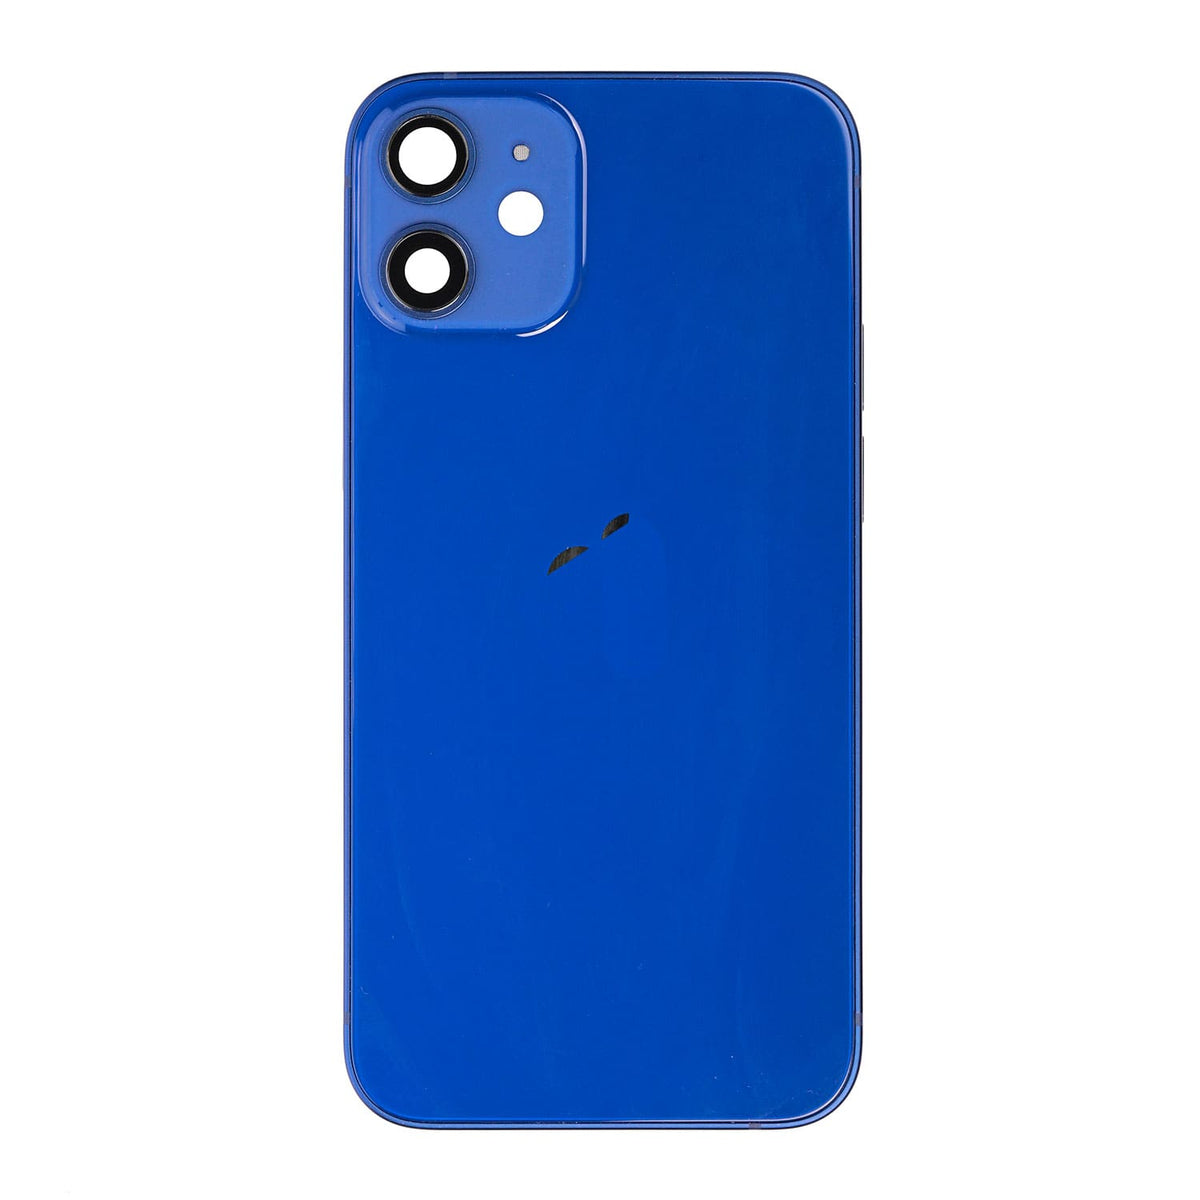 BLUE REAR HOUSING WITH FRAME FOR IPHONE 12 MINI